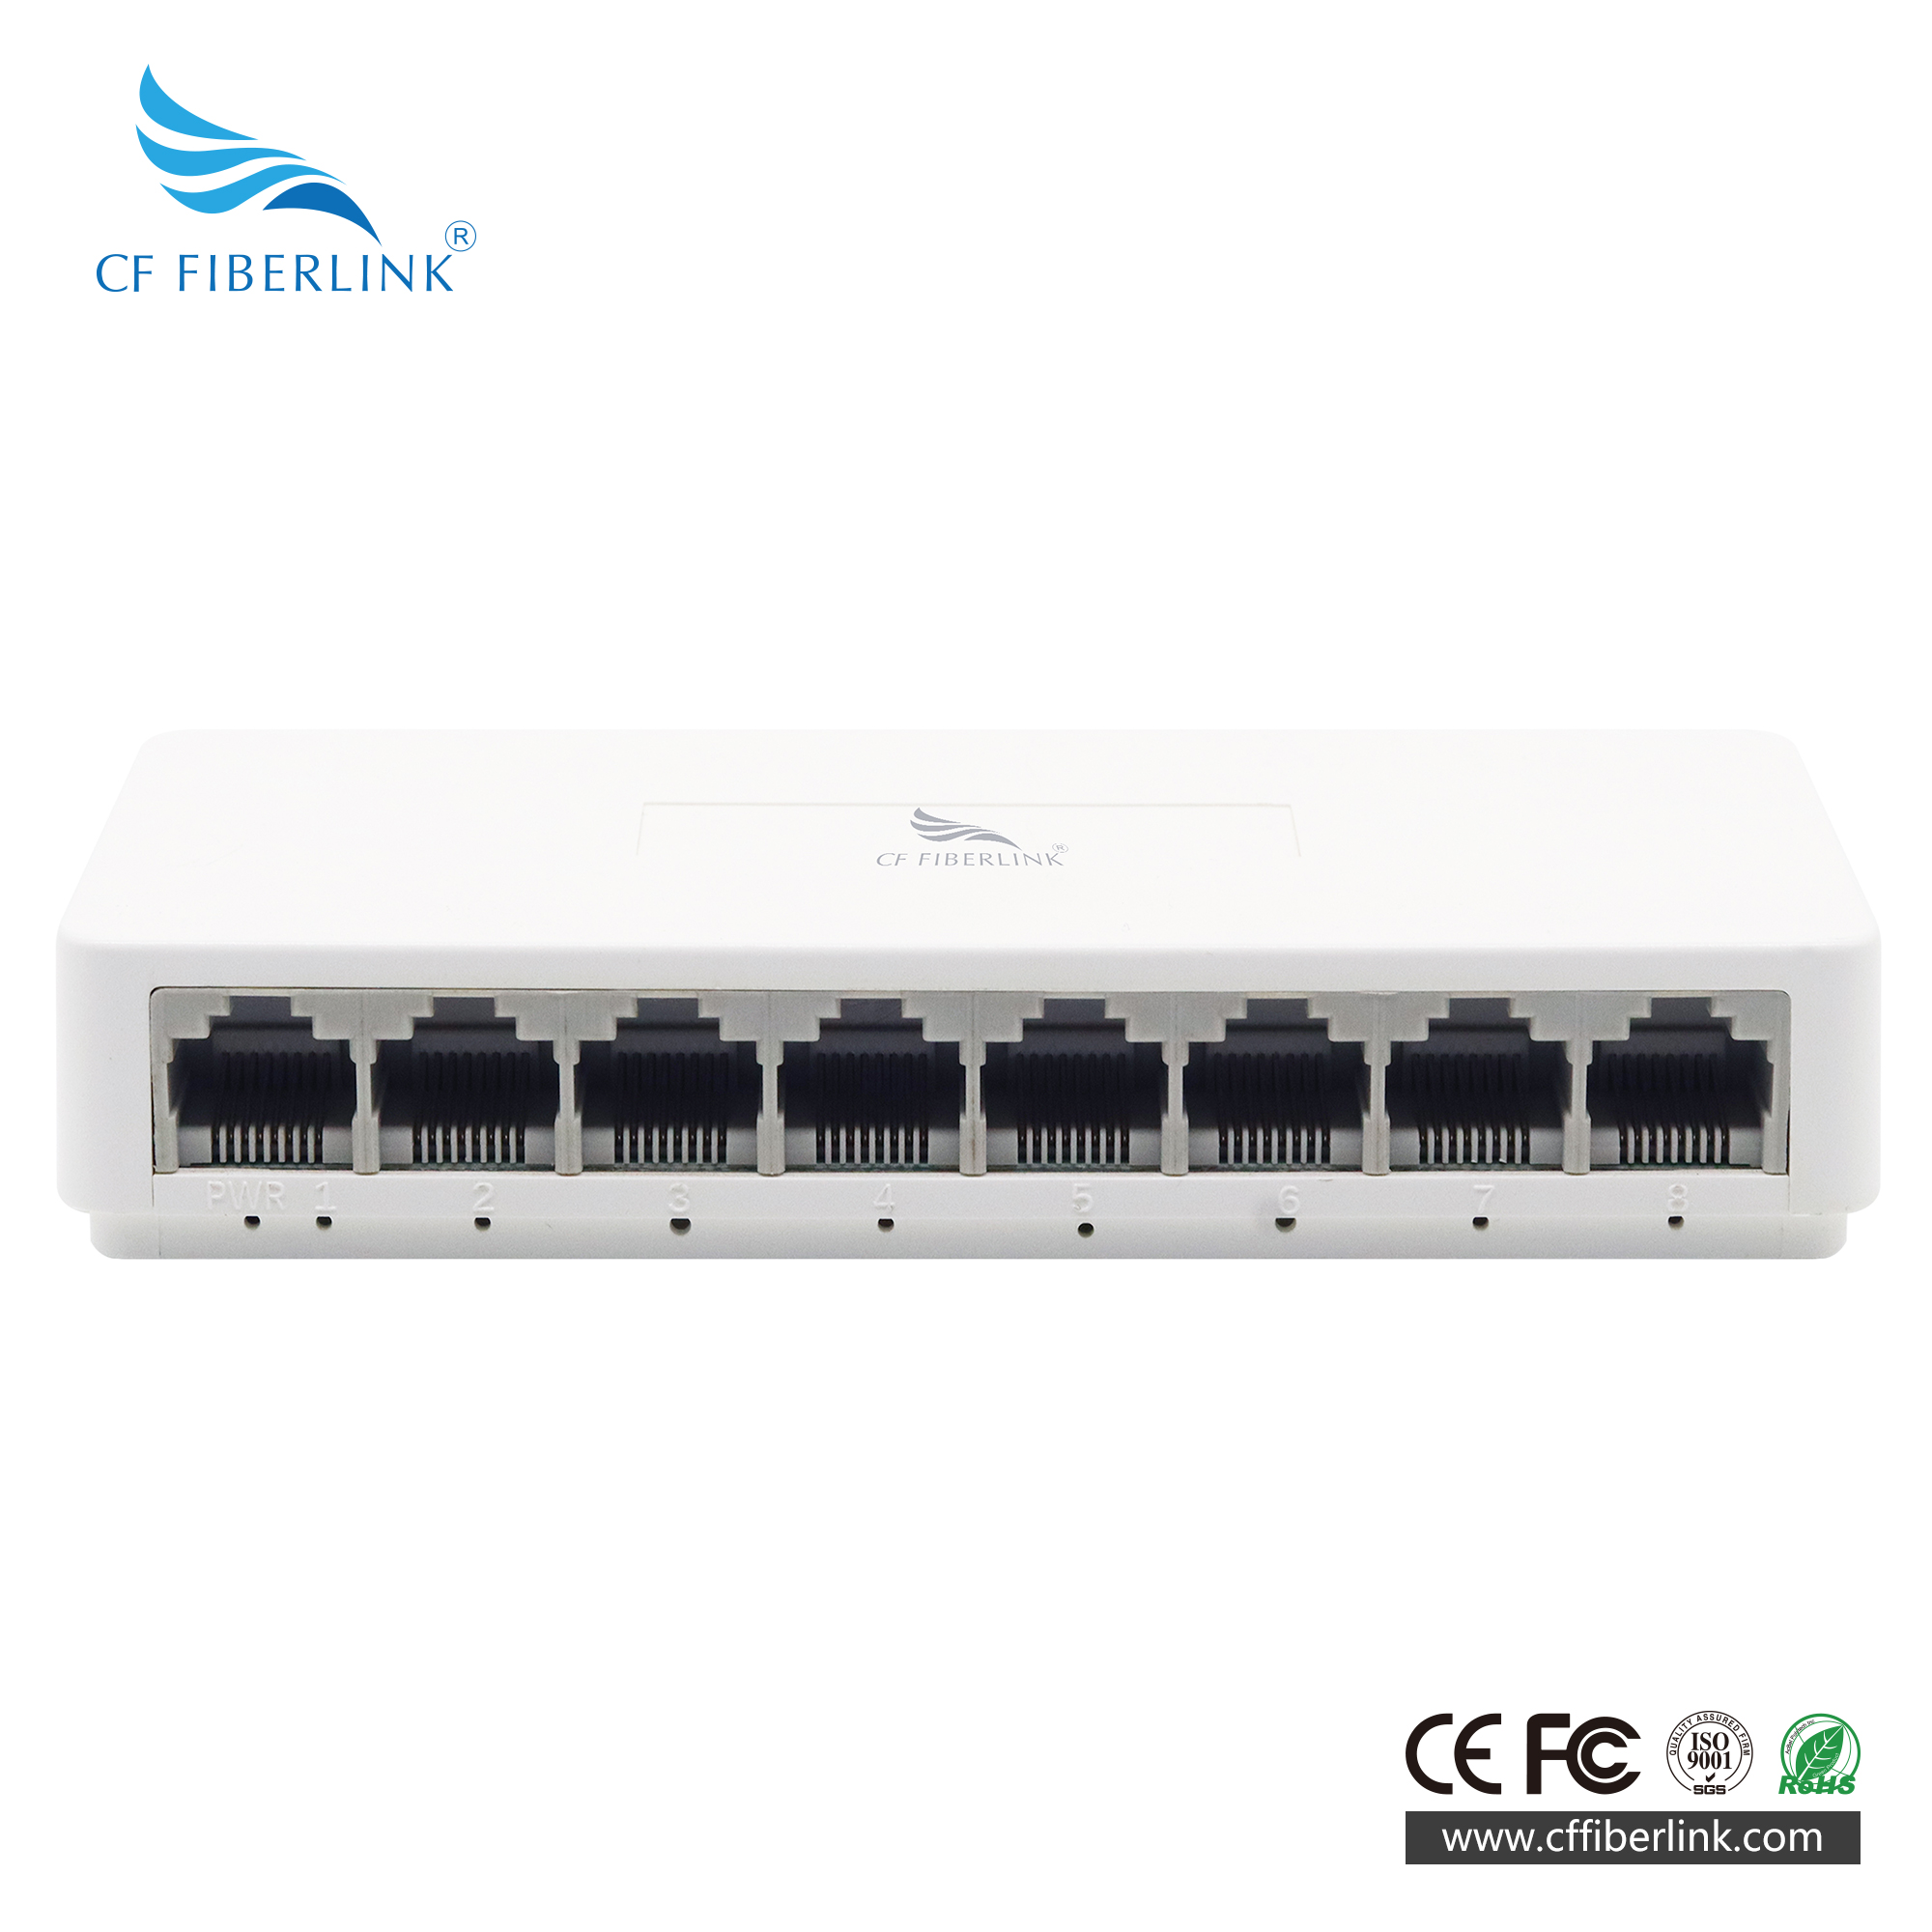 8-port 10/100/1000M Ethernet Switch Featured Image